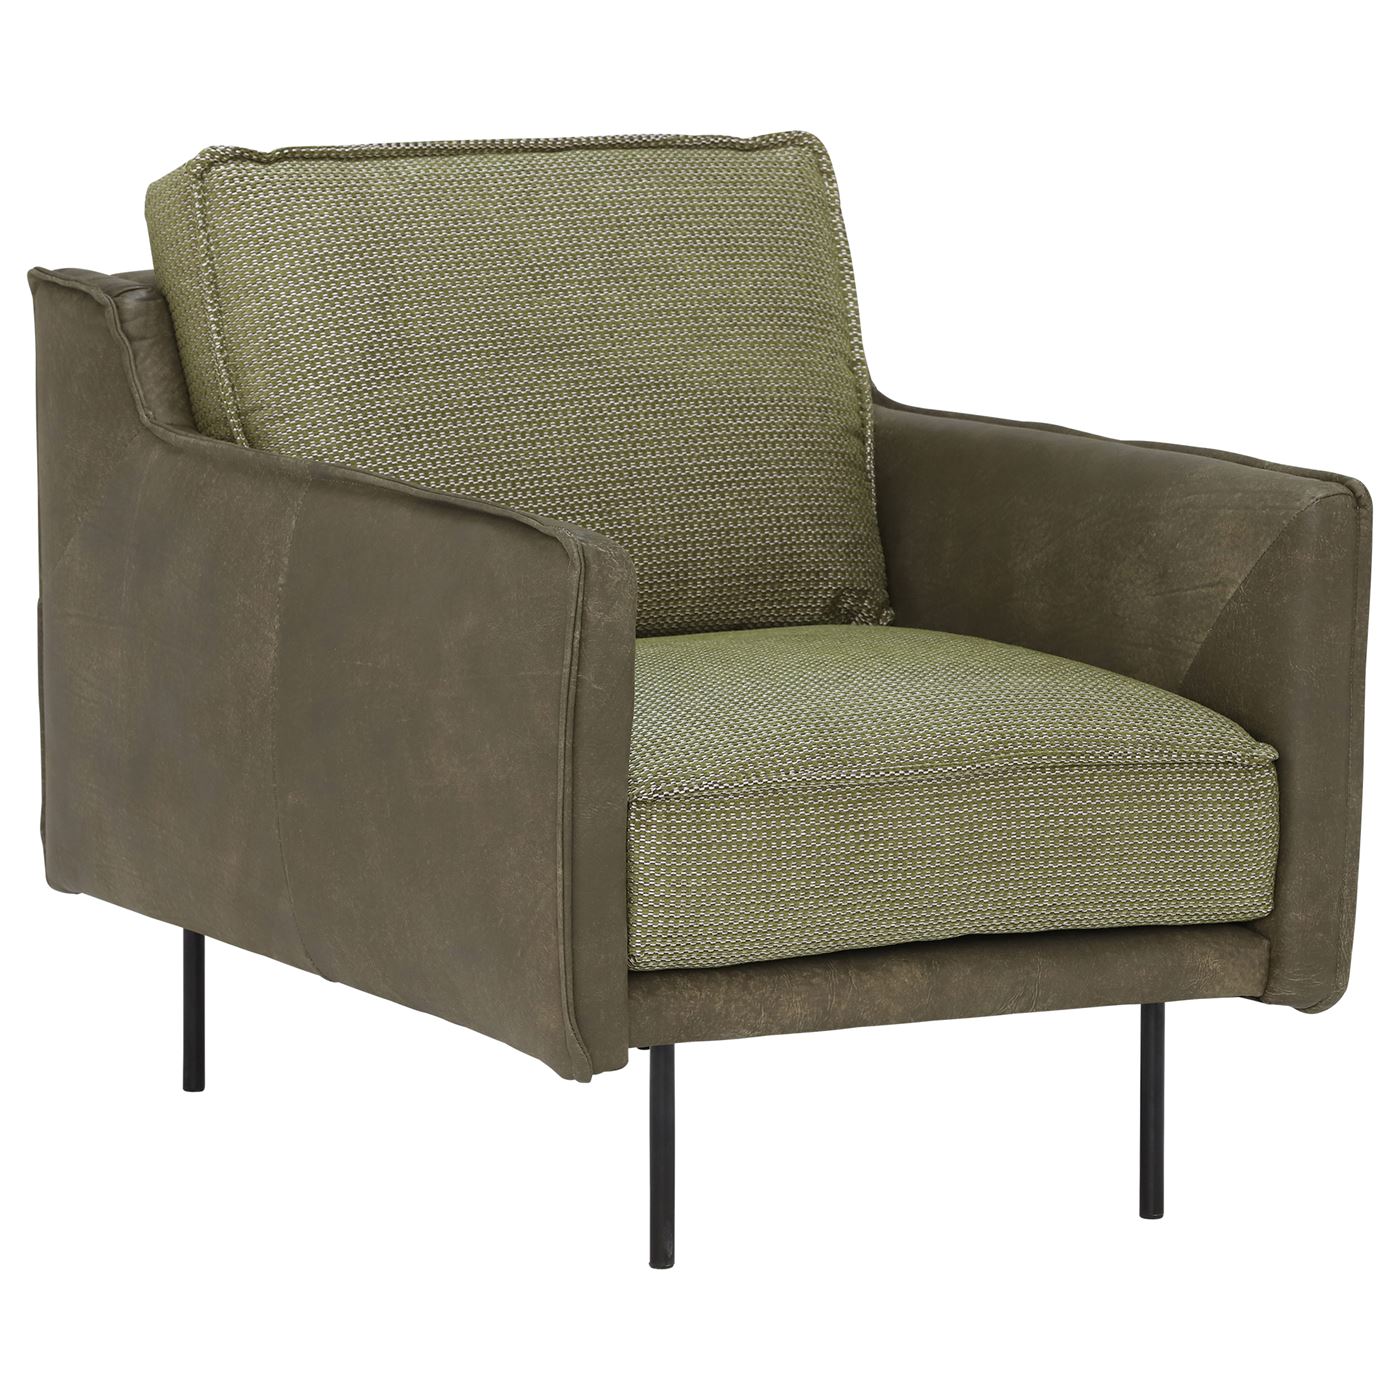 Livenza Small Armchair, Green Fabric | Barker & Stonehouse